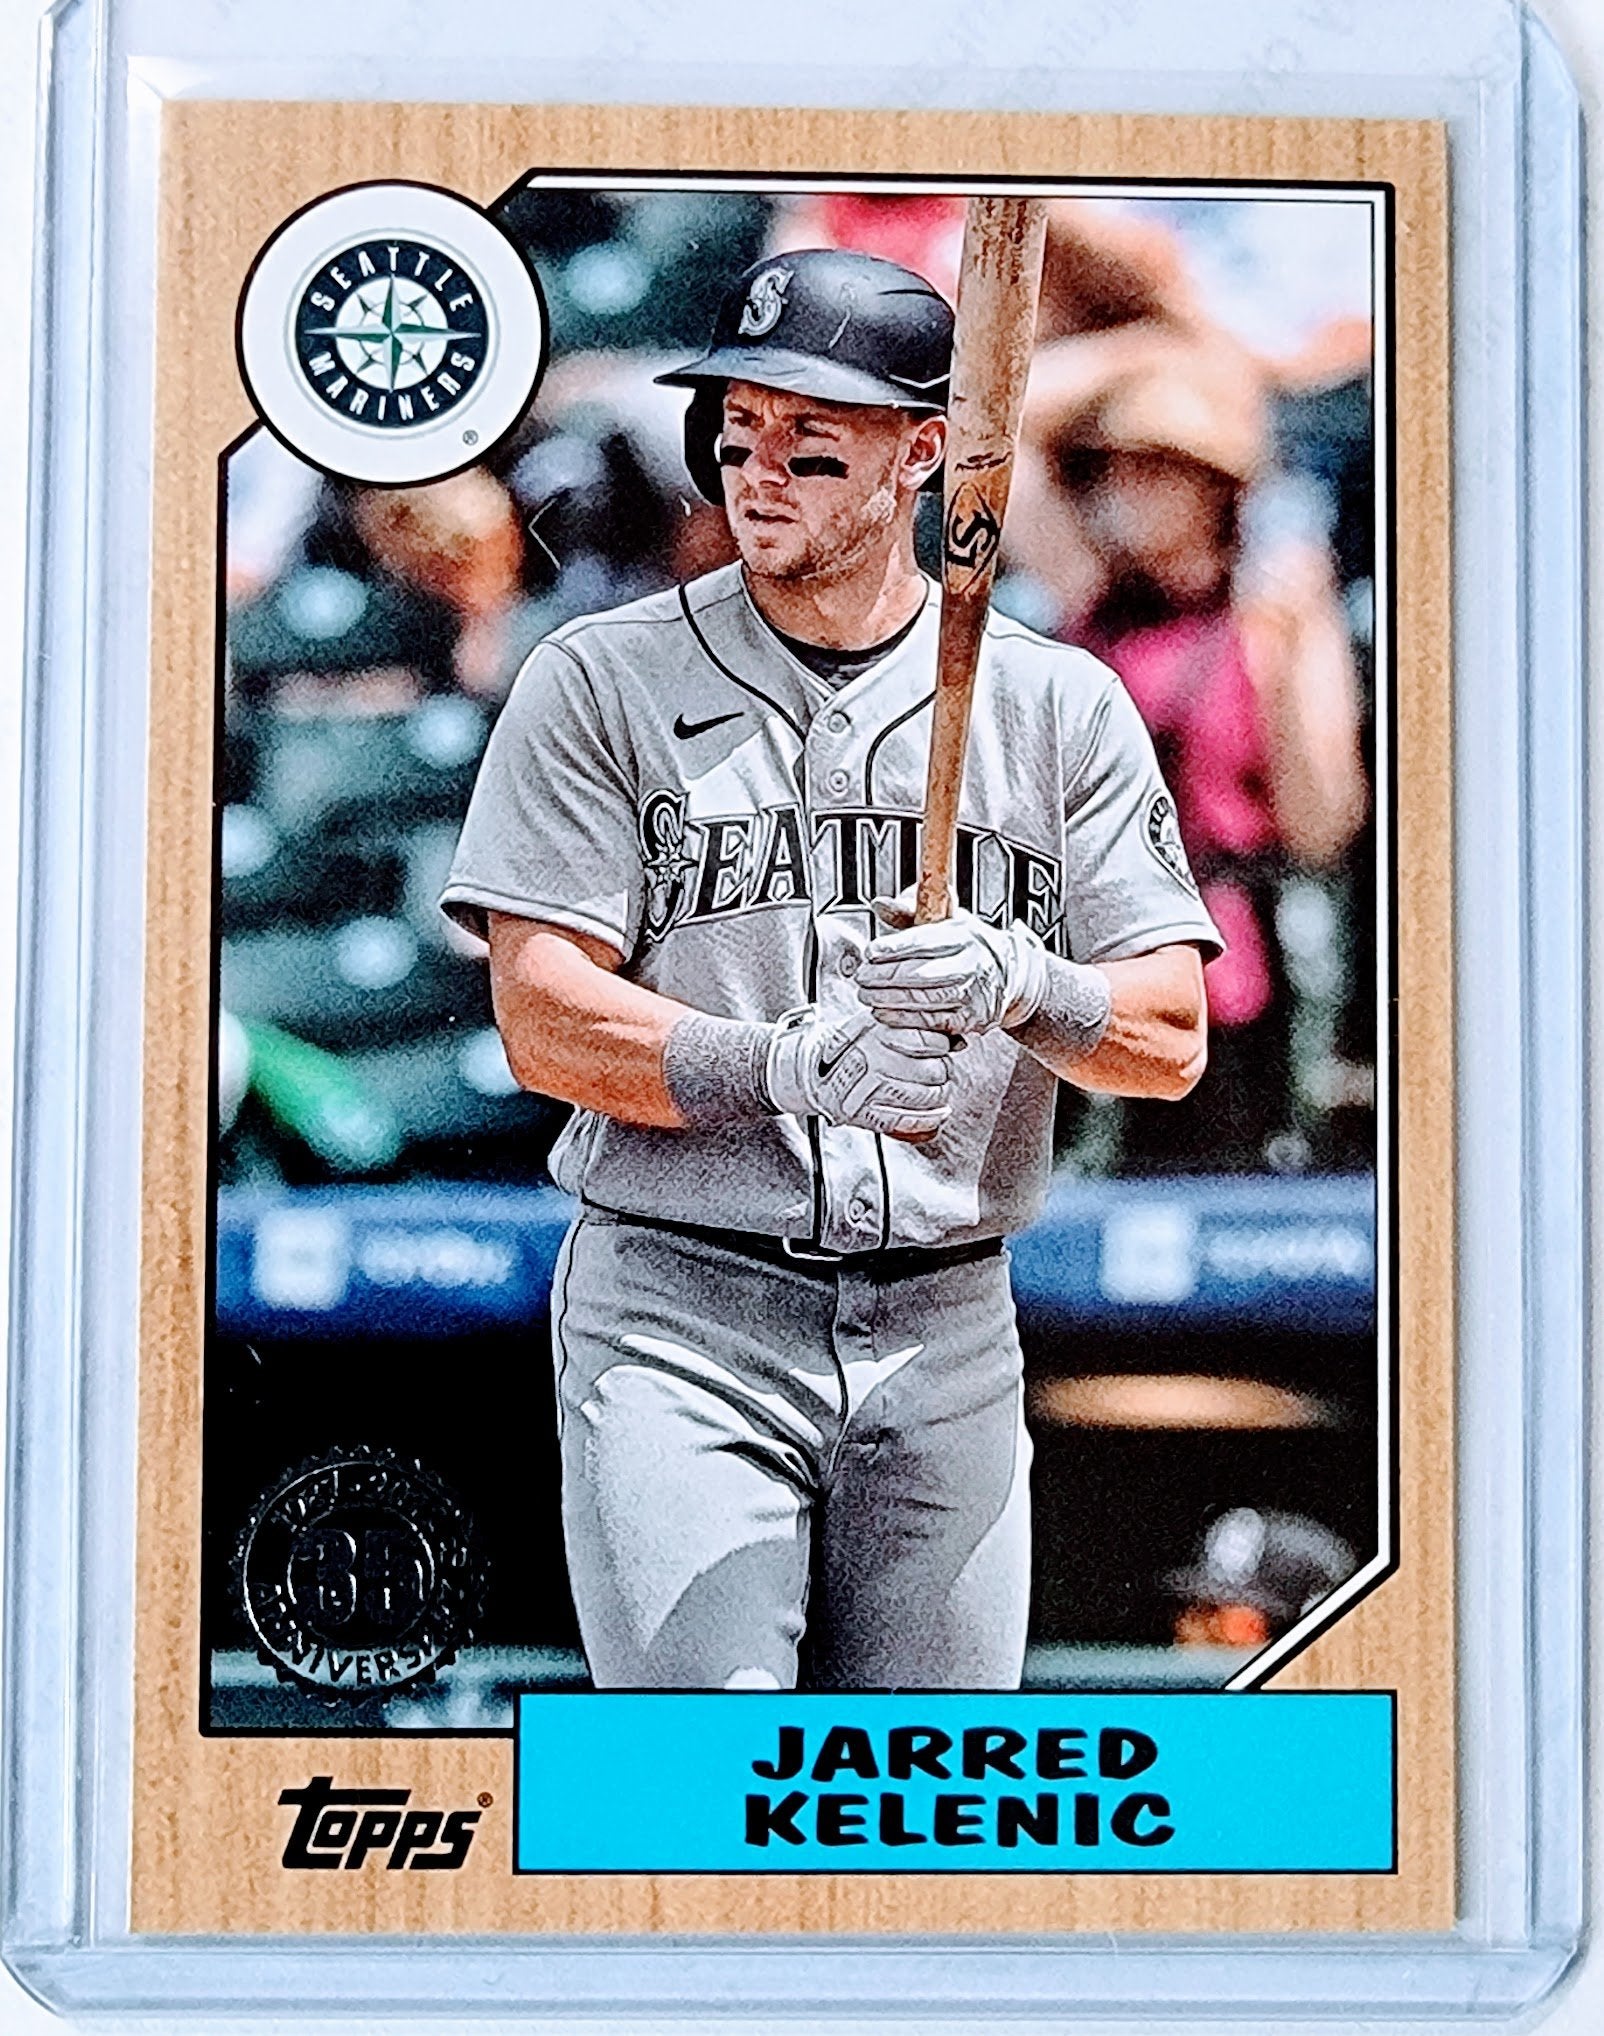 2022 Topps Jarred Kelenic Baseball Anniversary Baseball Trading Card GRB1 simple Xclusive Collectibles   